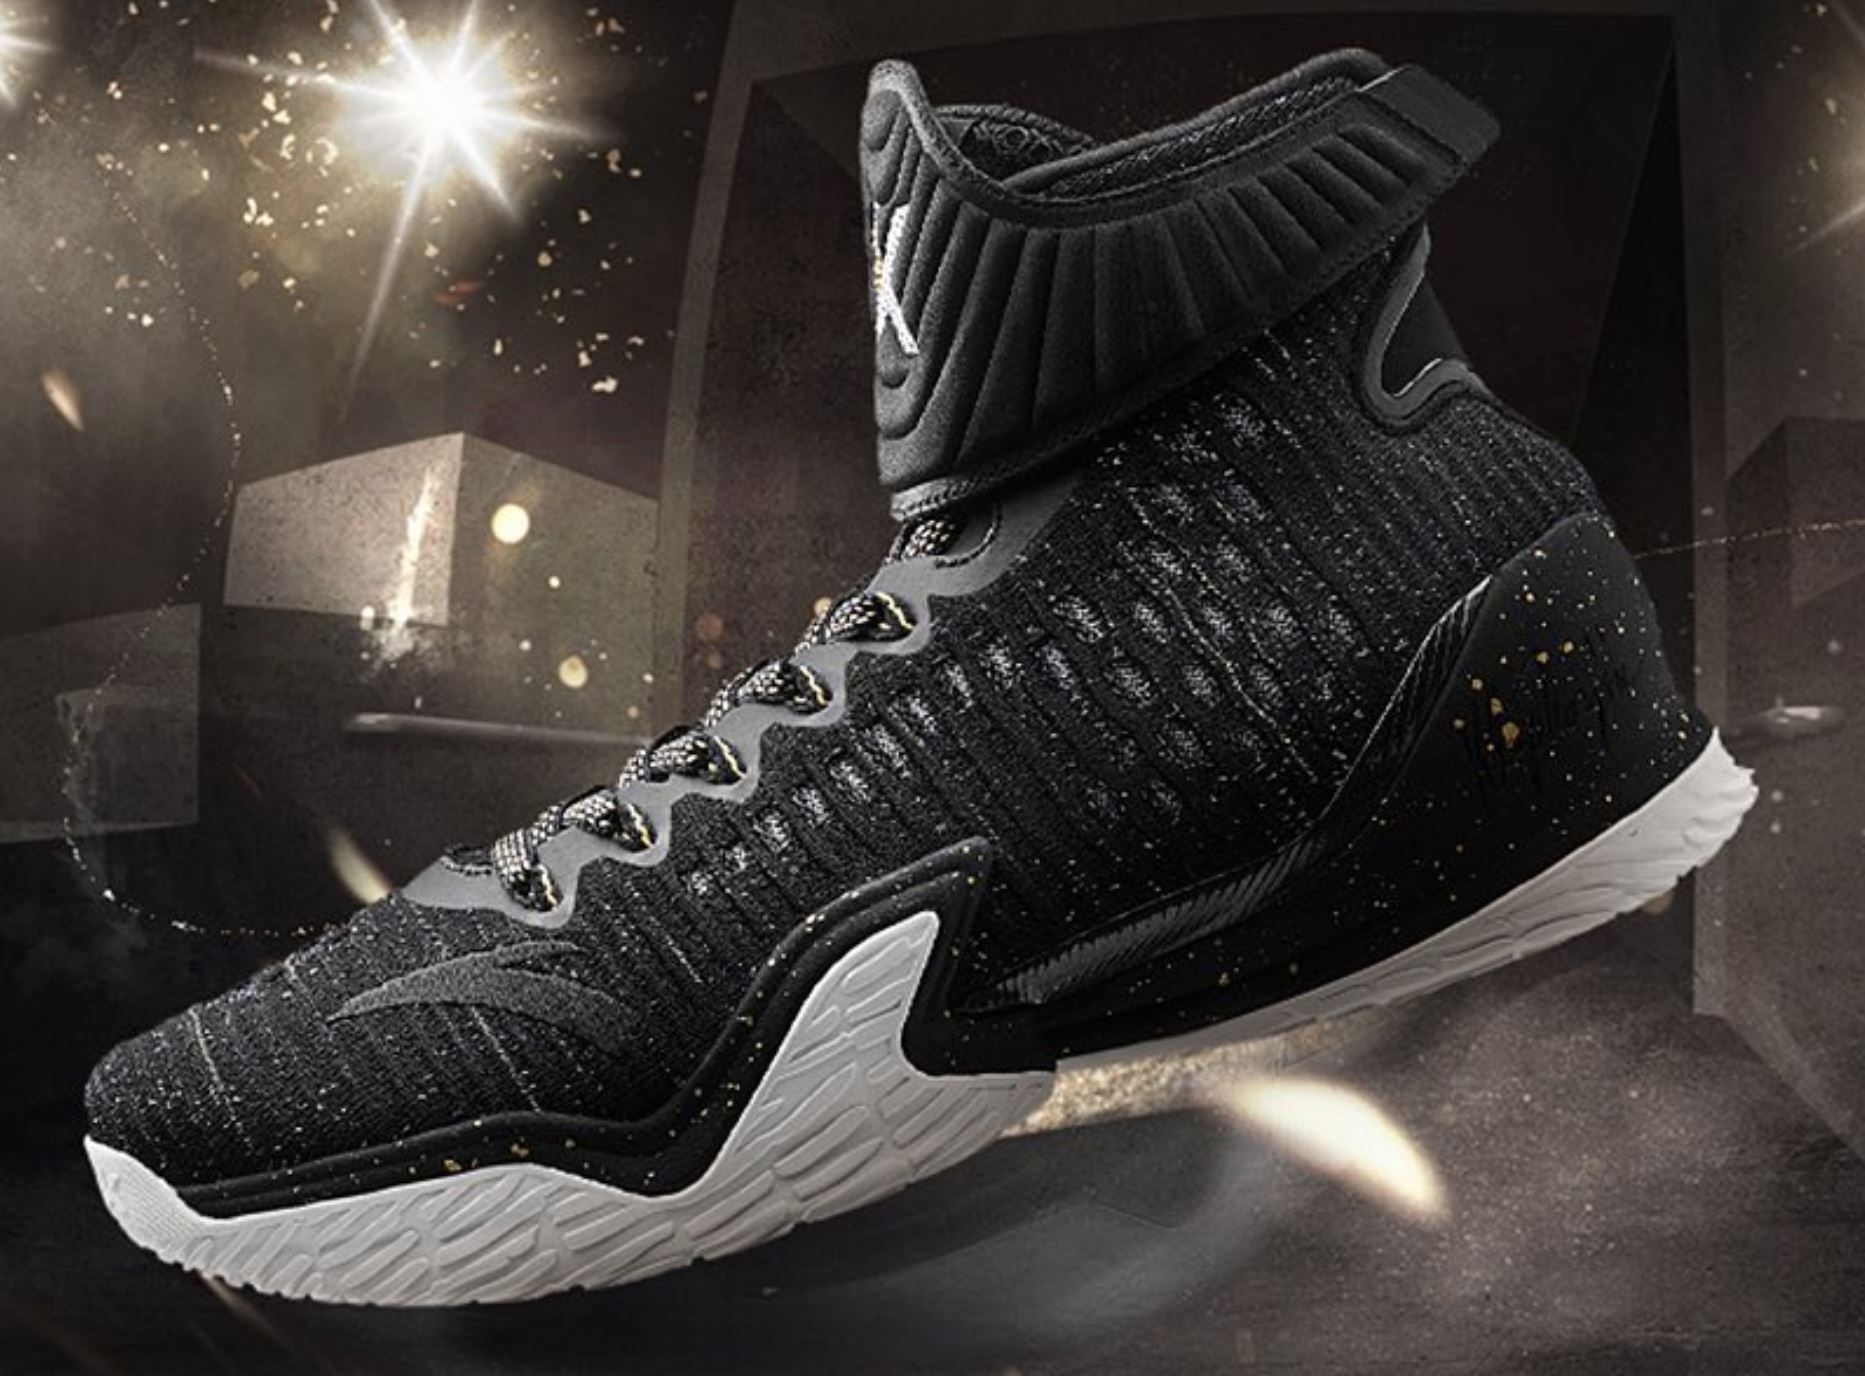 klay thompson black panther shoes